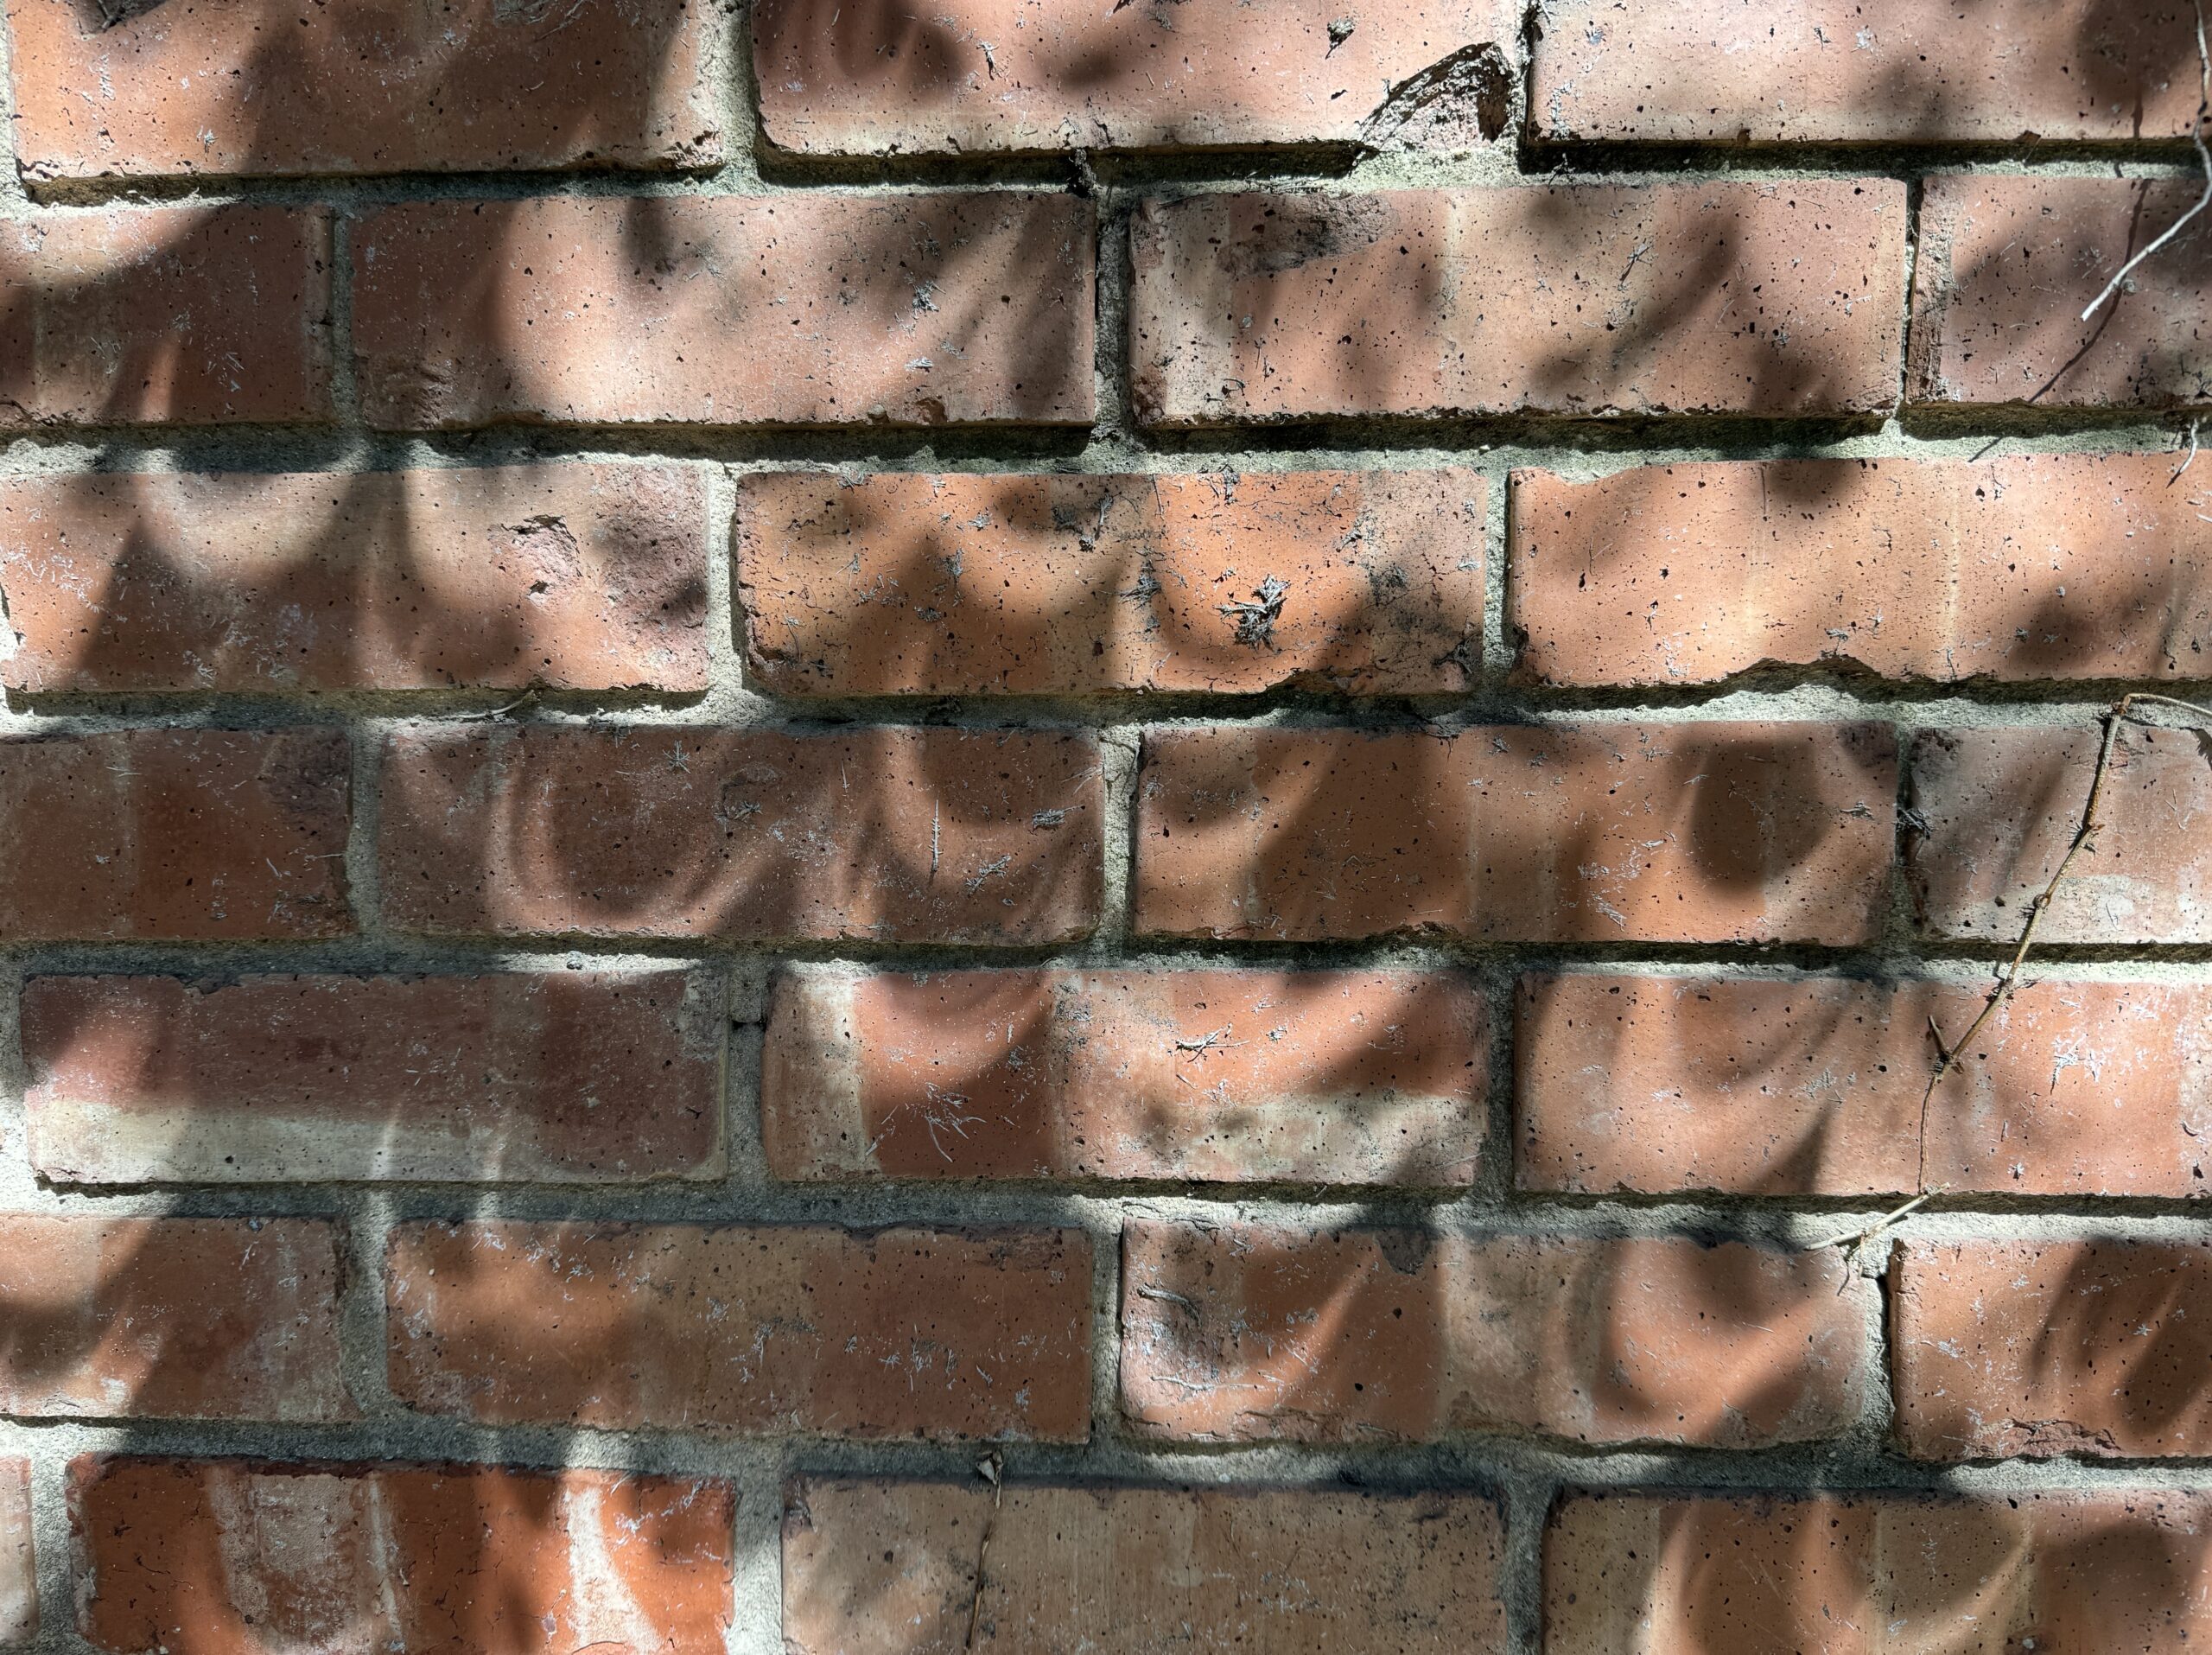 A random scattering of crescent shapes from the leaves reflecting on a gray painted brick wall, with the leaves acting like pinhole cameras during the eclipse.